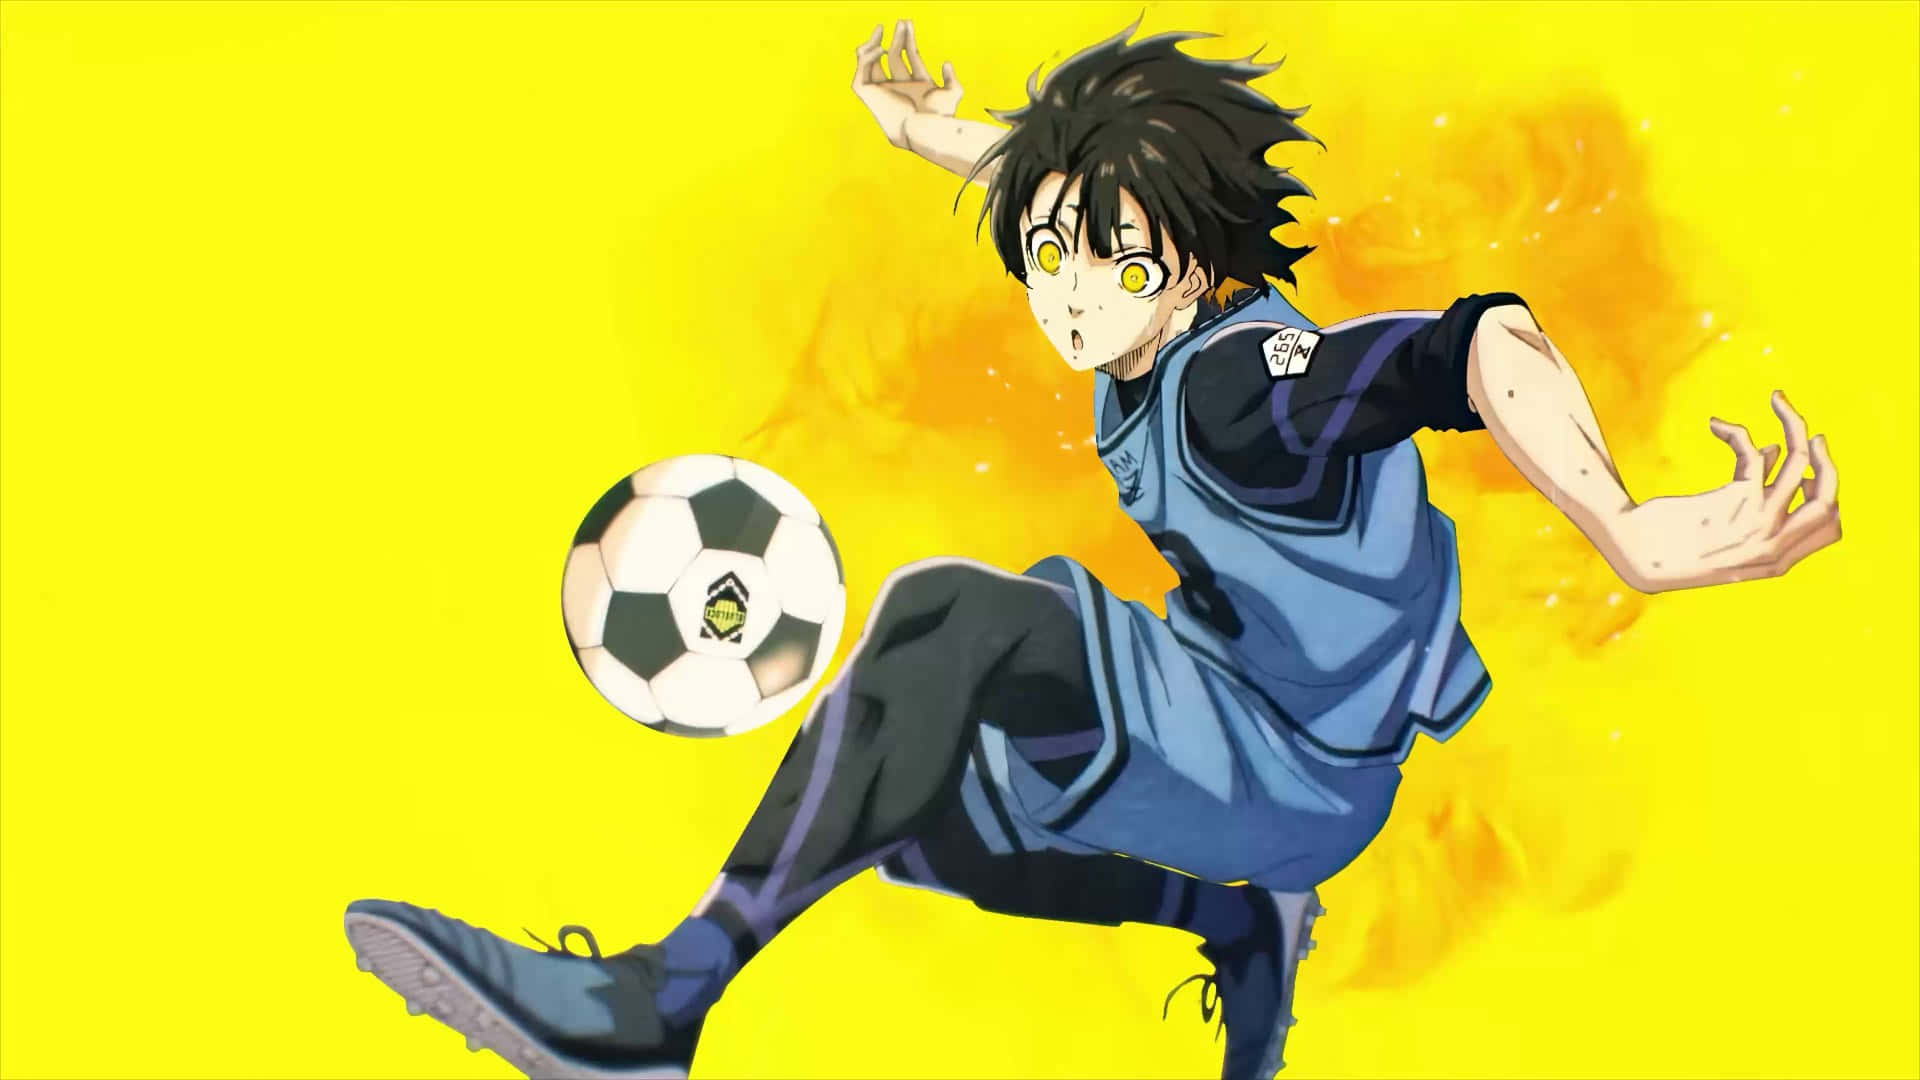 Animated Soccer Player Action Shot Wallpaper